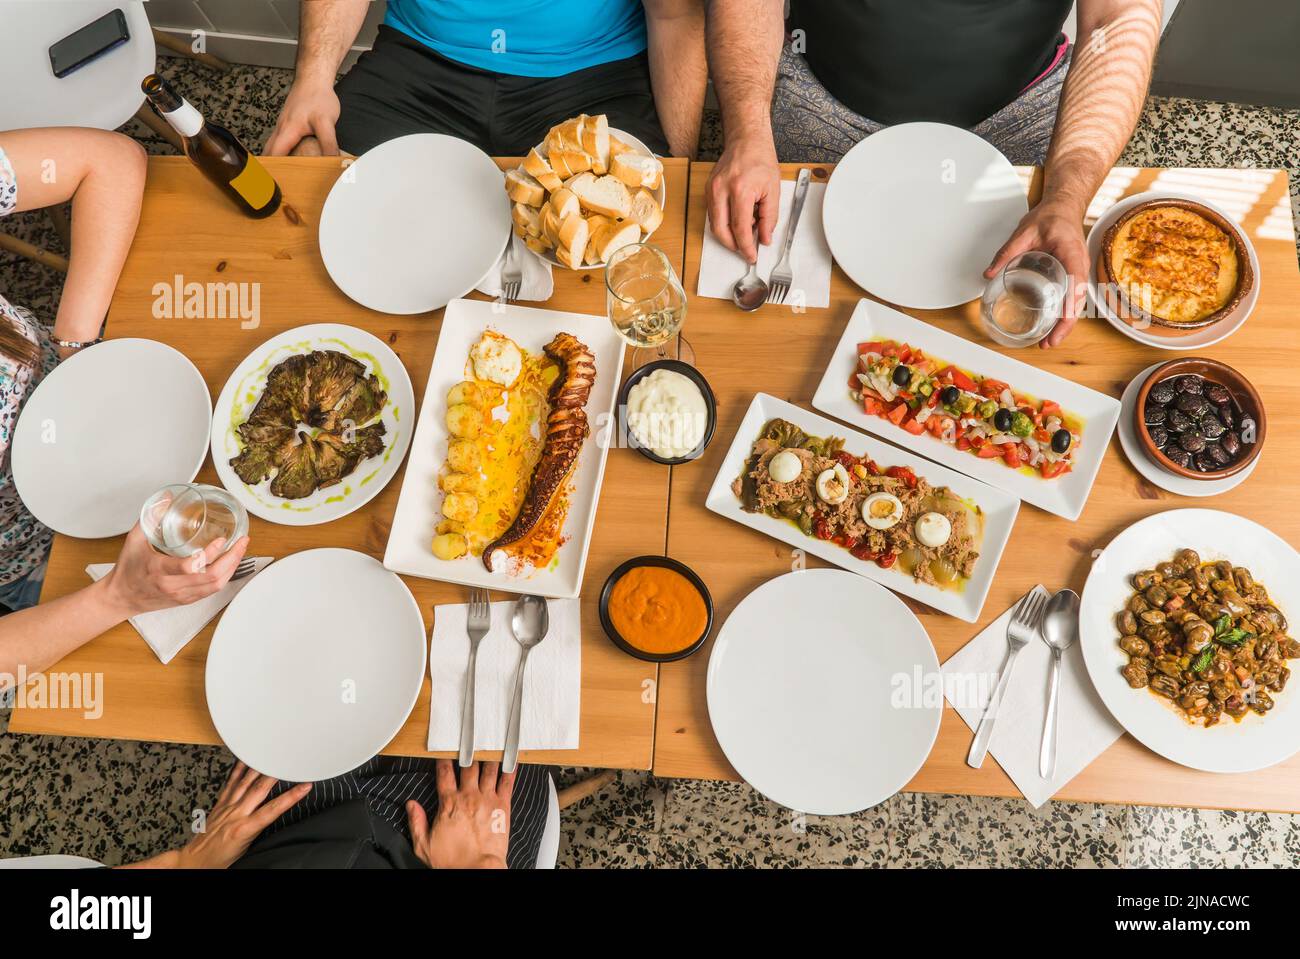 Table with tapas, salads and typical Spanish food around which people are sitting ready to eat. Focus on the center plates. Stock Photo